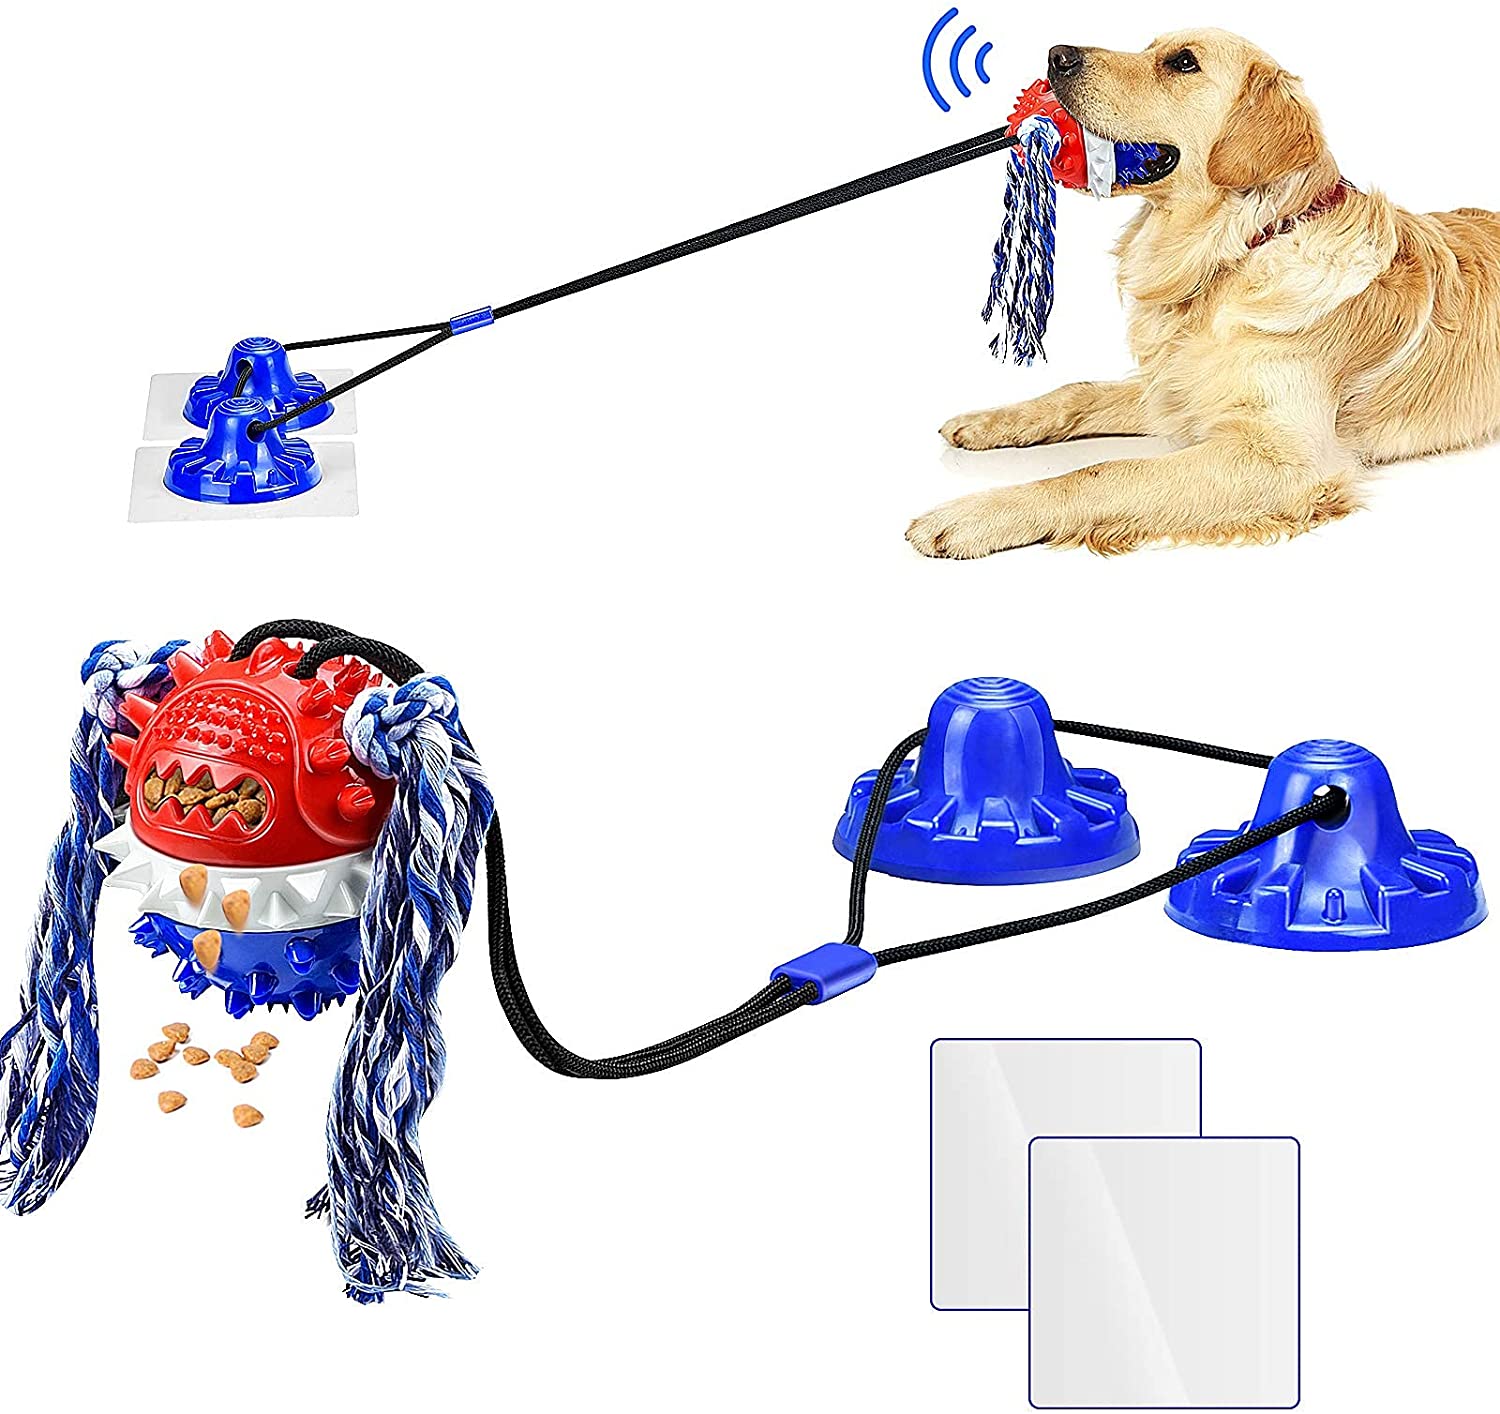 QUMY Double Suction Cup Dogs Toys